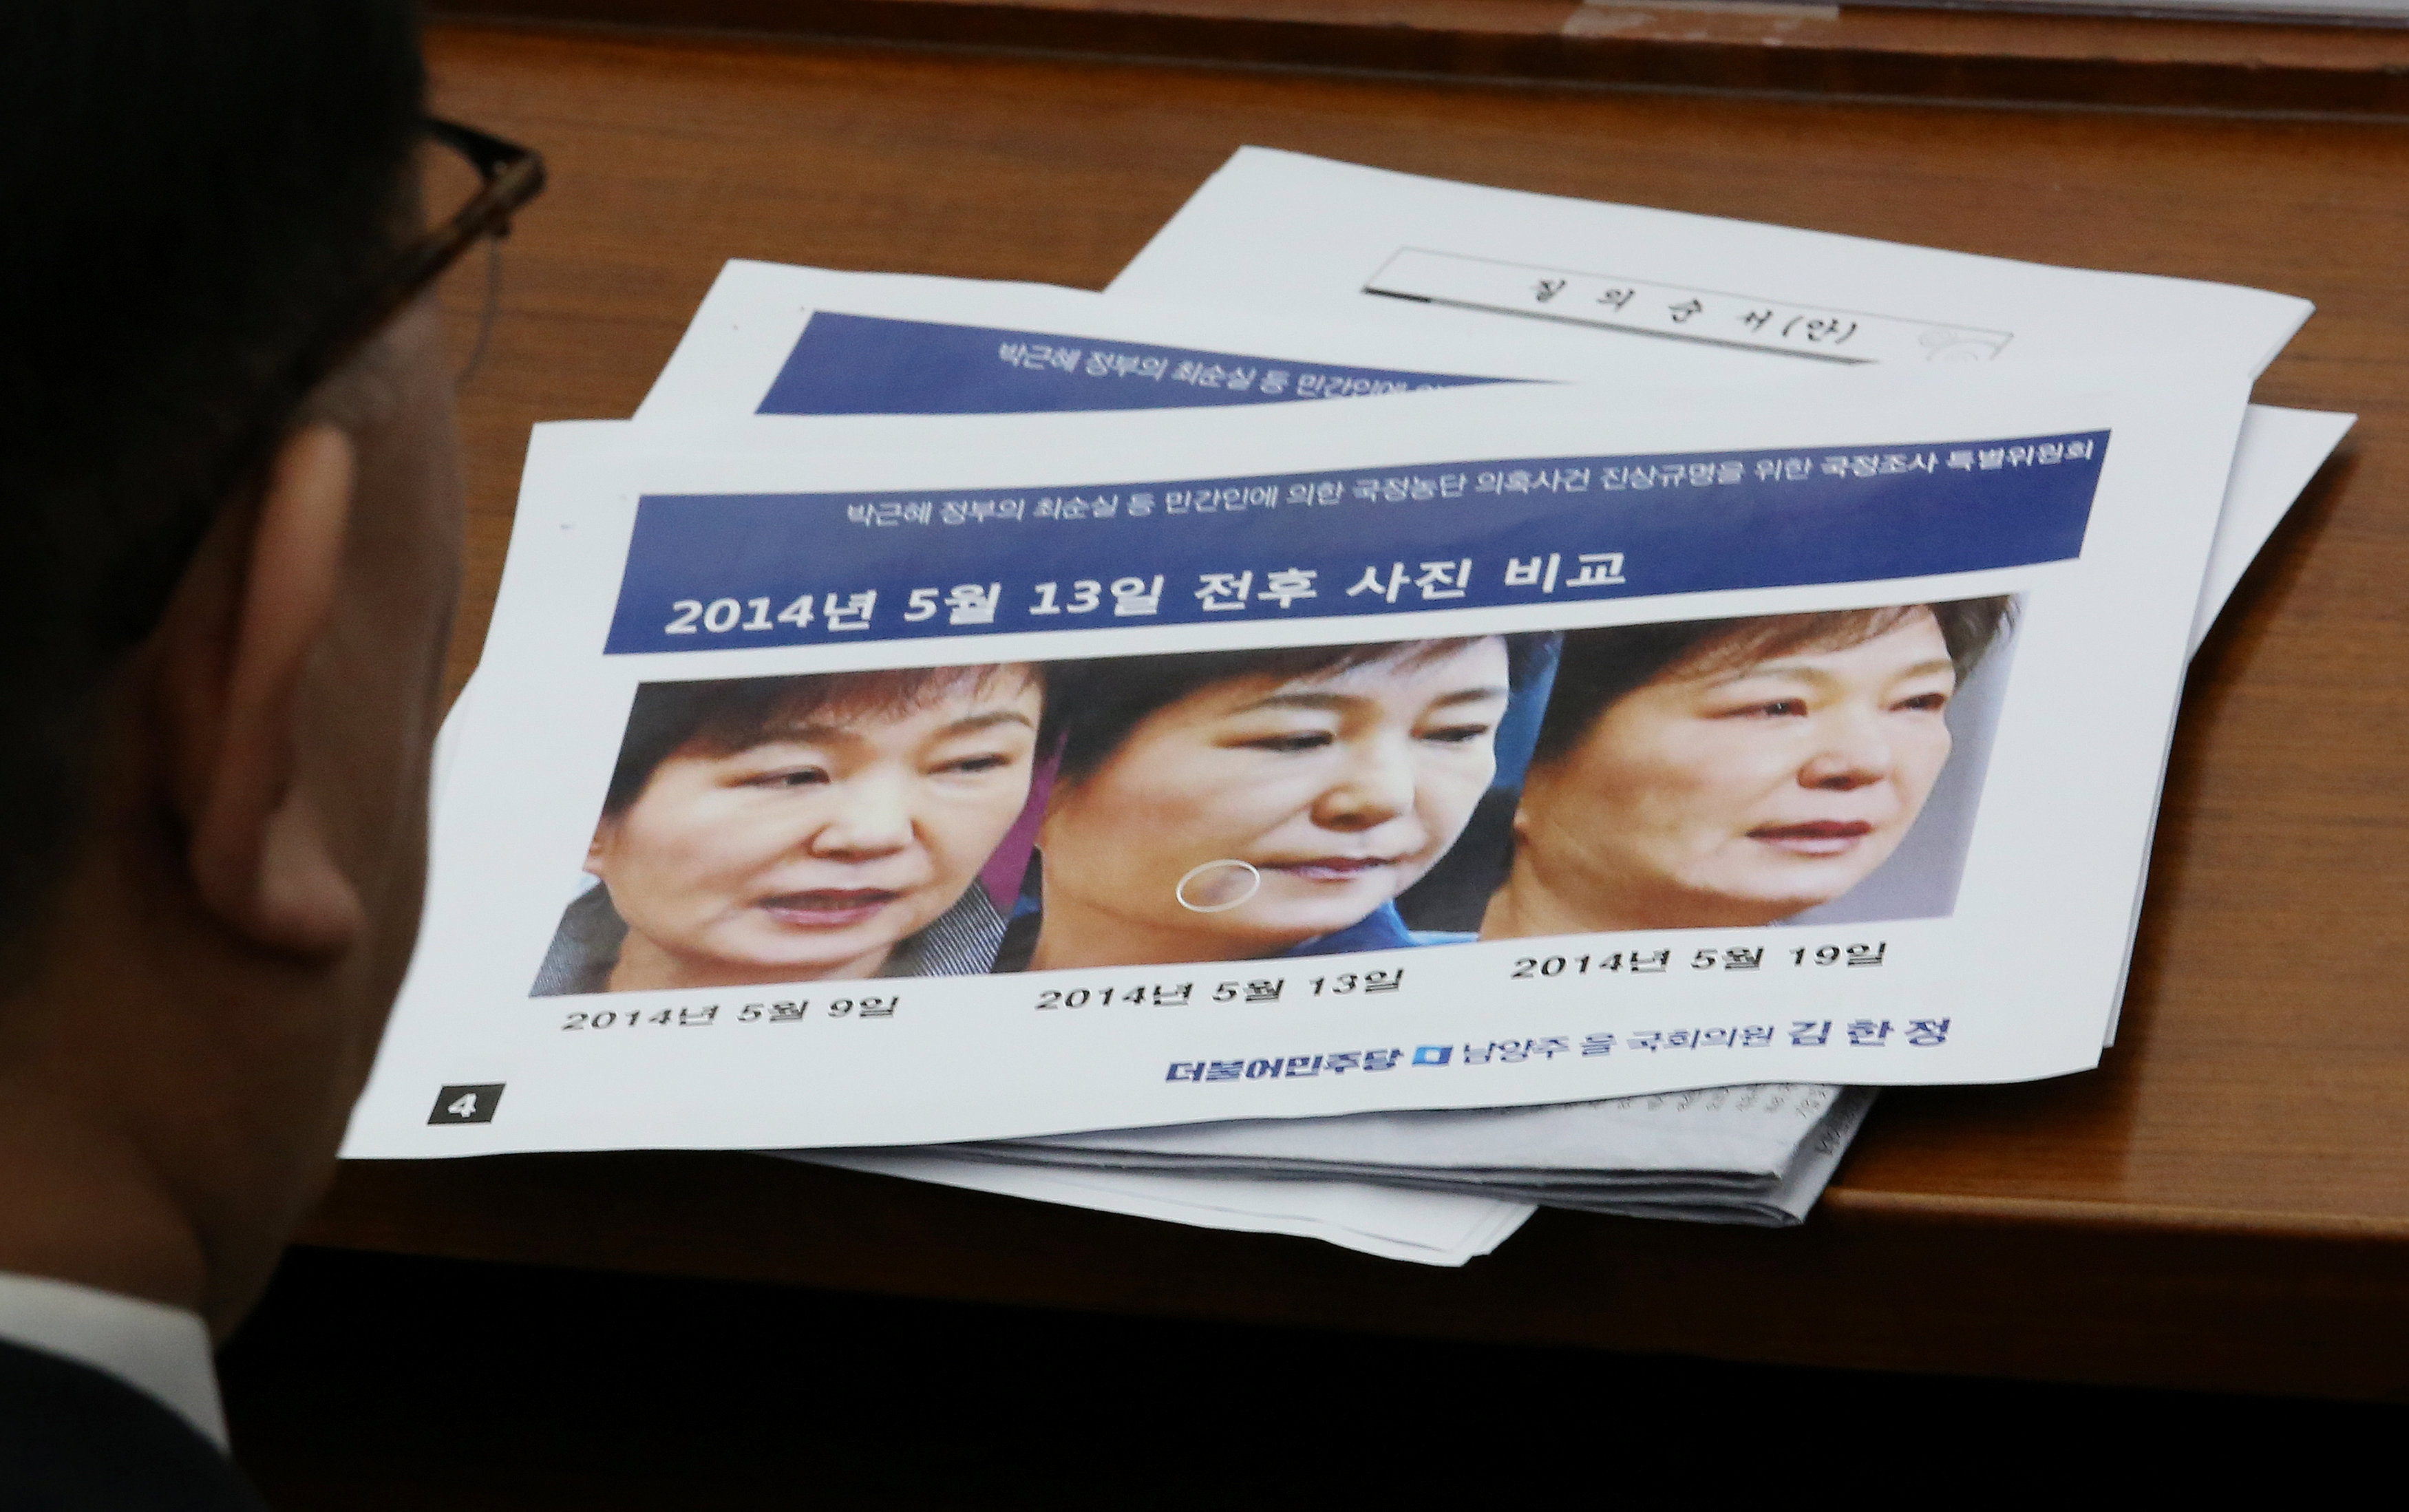 Kim Young-jae, who heads a hospital regularly visited by impeached President Park Geun-hye's longtime friend Choi Soon-sil, looks at impeached President Park Geun-hye's three pictures combo each taken on May 9th, May 13th, May 19, 2014 respectively, durin